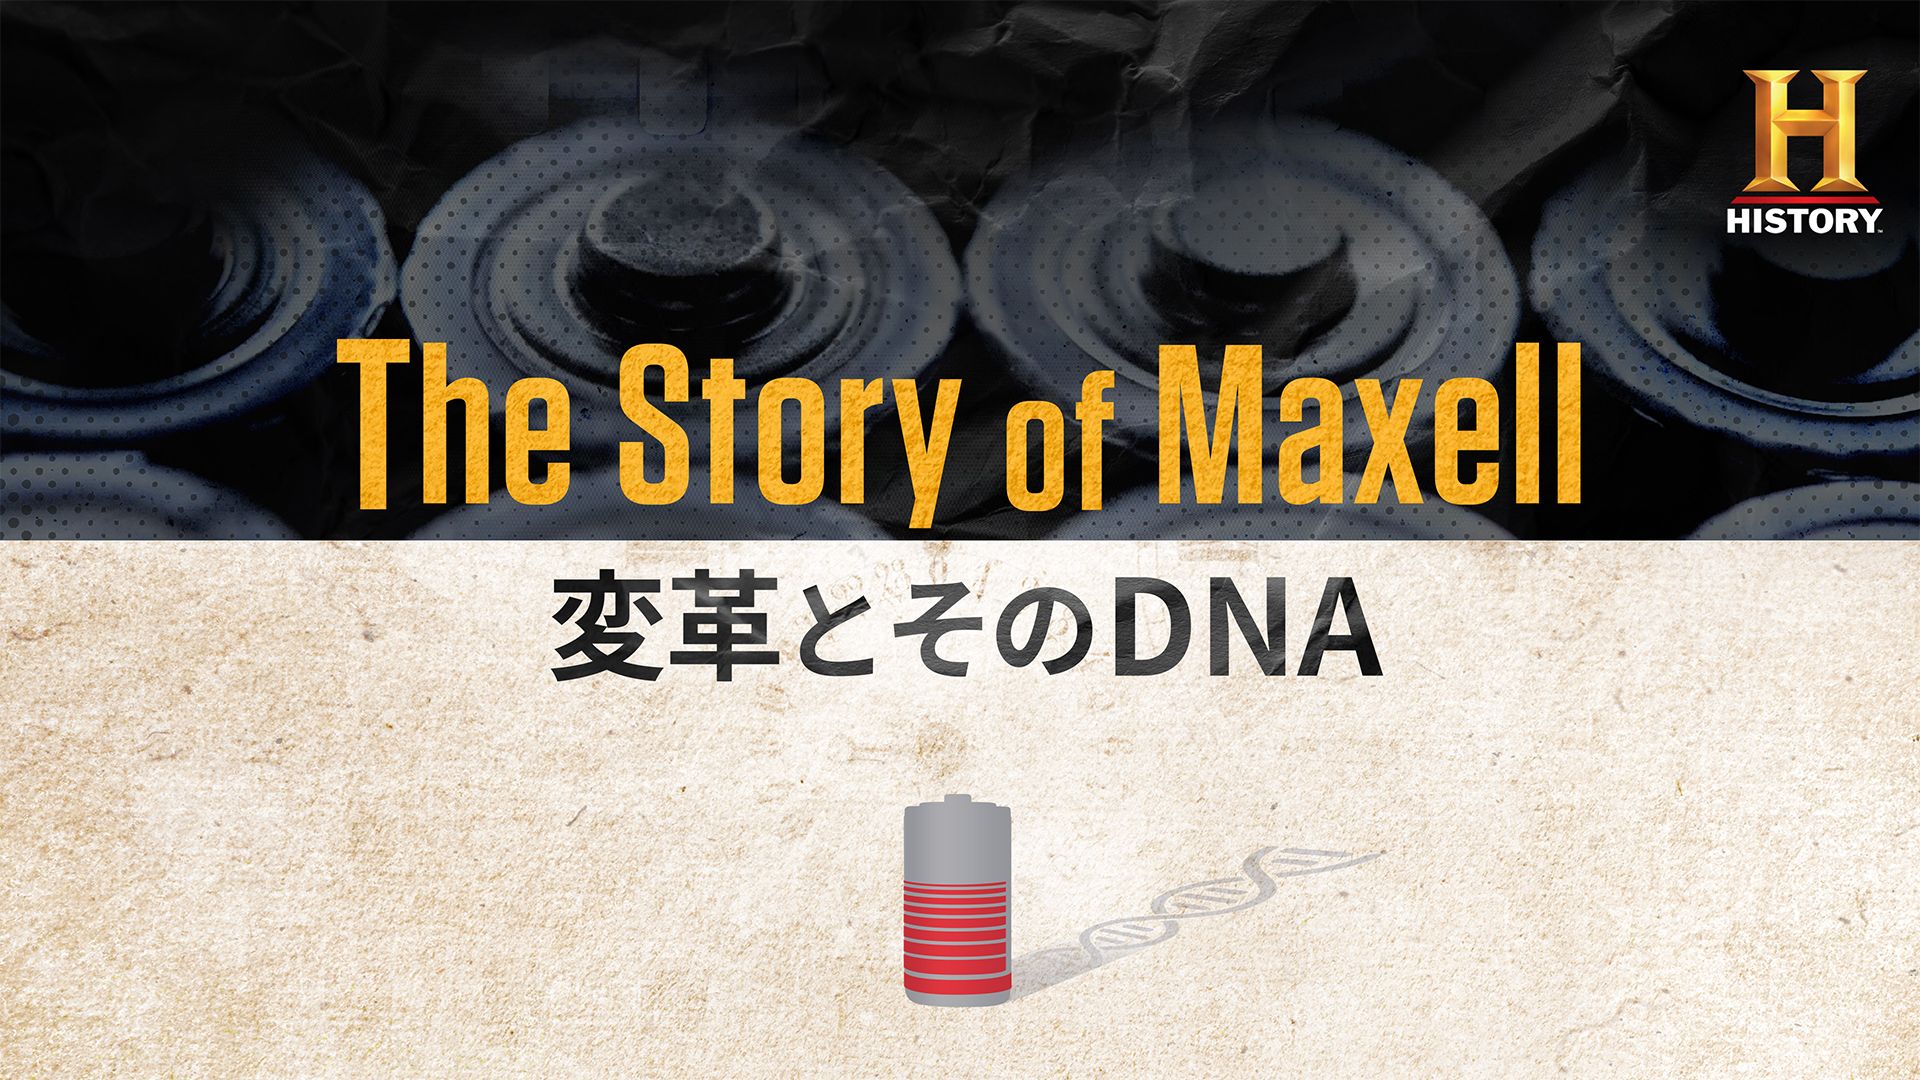 The Story of Maxell 〜変革とそのDNA〜